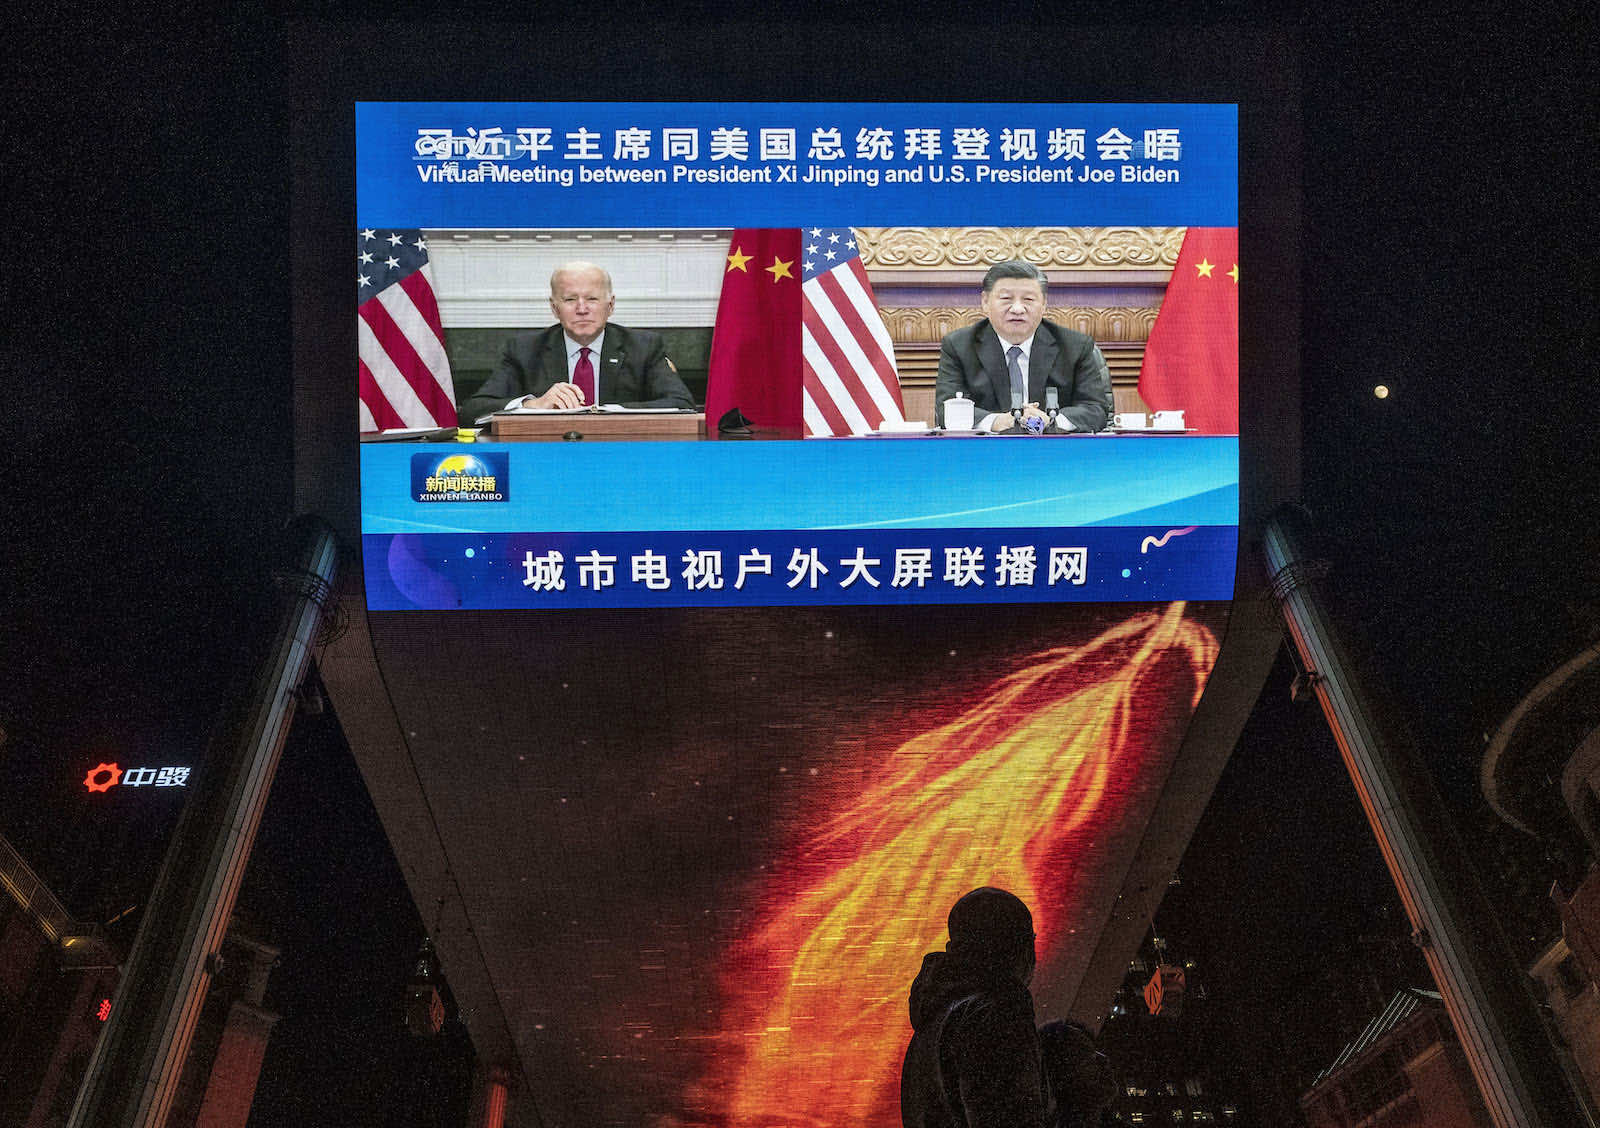 A large outdoor screen in Beijing displays United States President Joe Biden, left, and China’s President Xi Jinping during their virtual summit in November (Kevin Frayer/Getty Images)